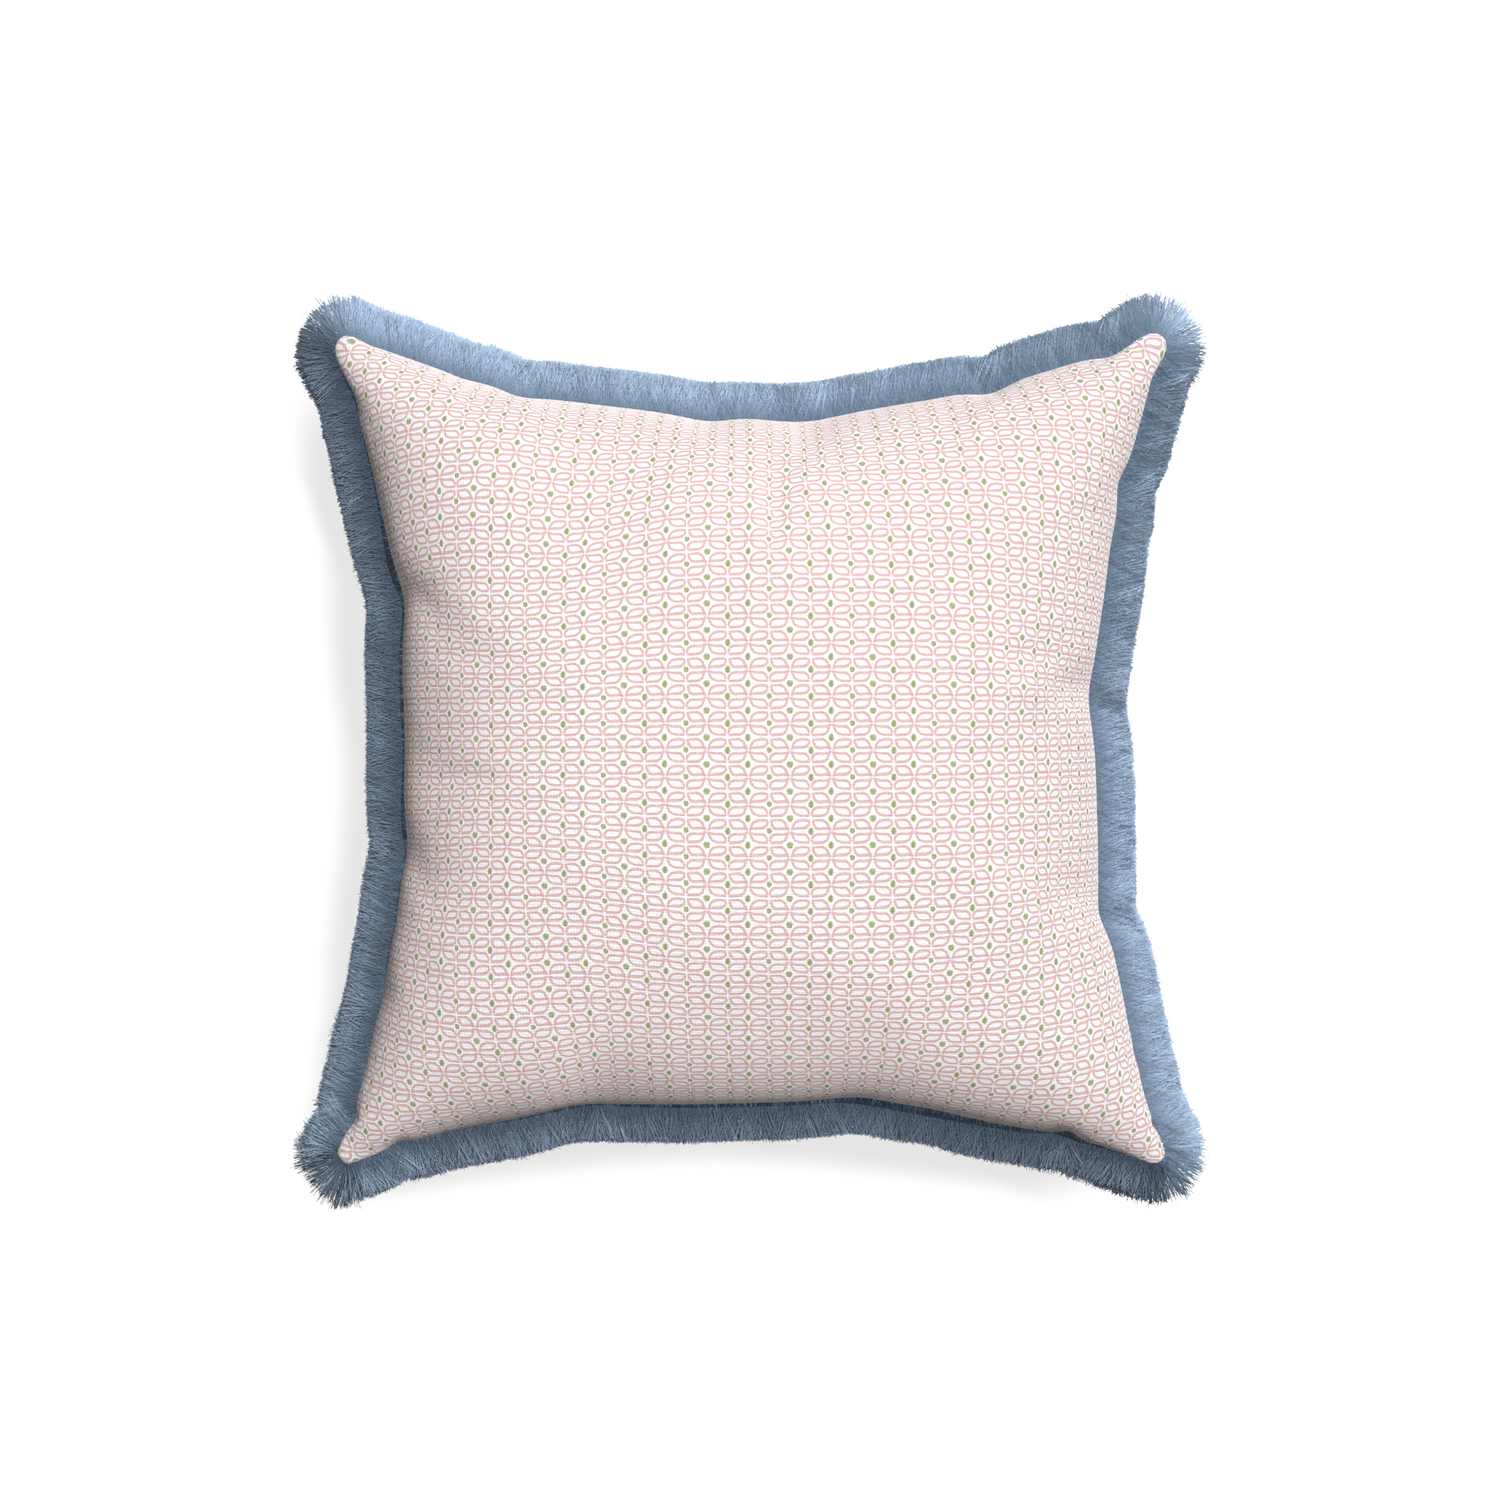 18-square loomi pink custom pink geometricpillow with sky fringe on white background